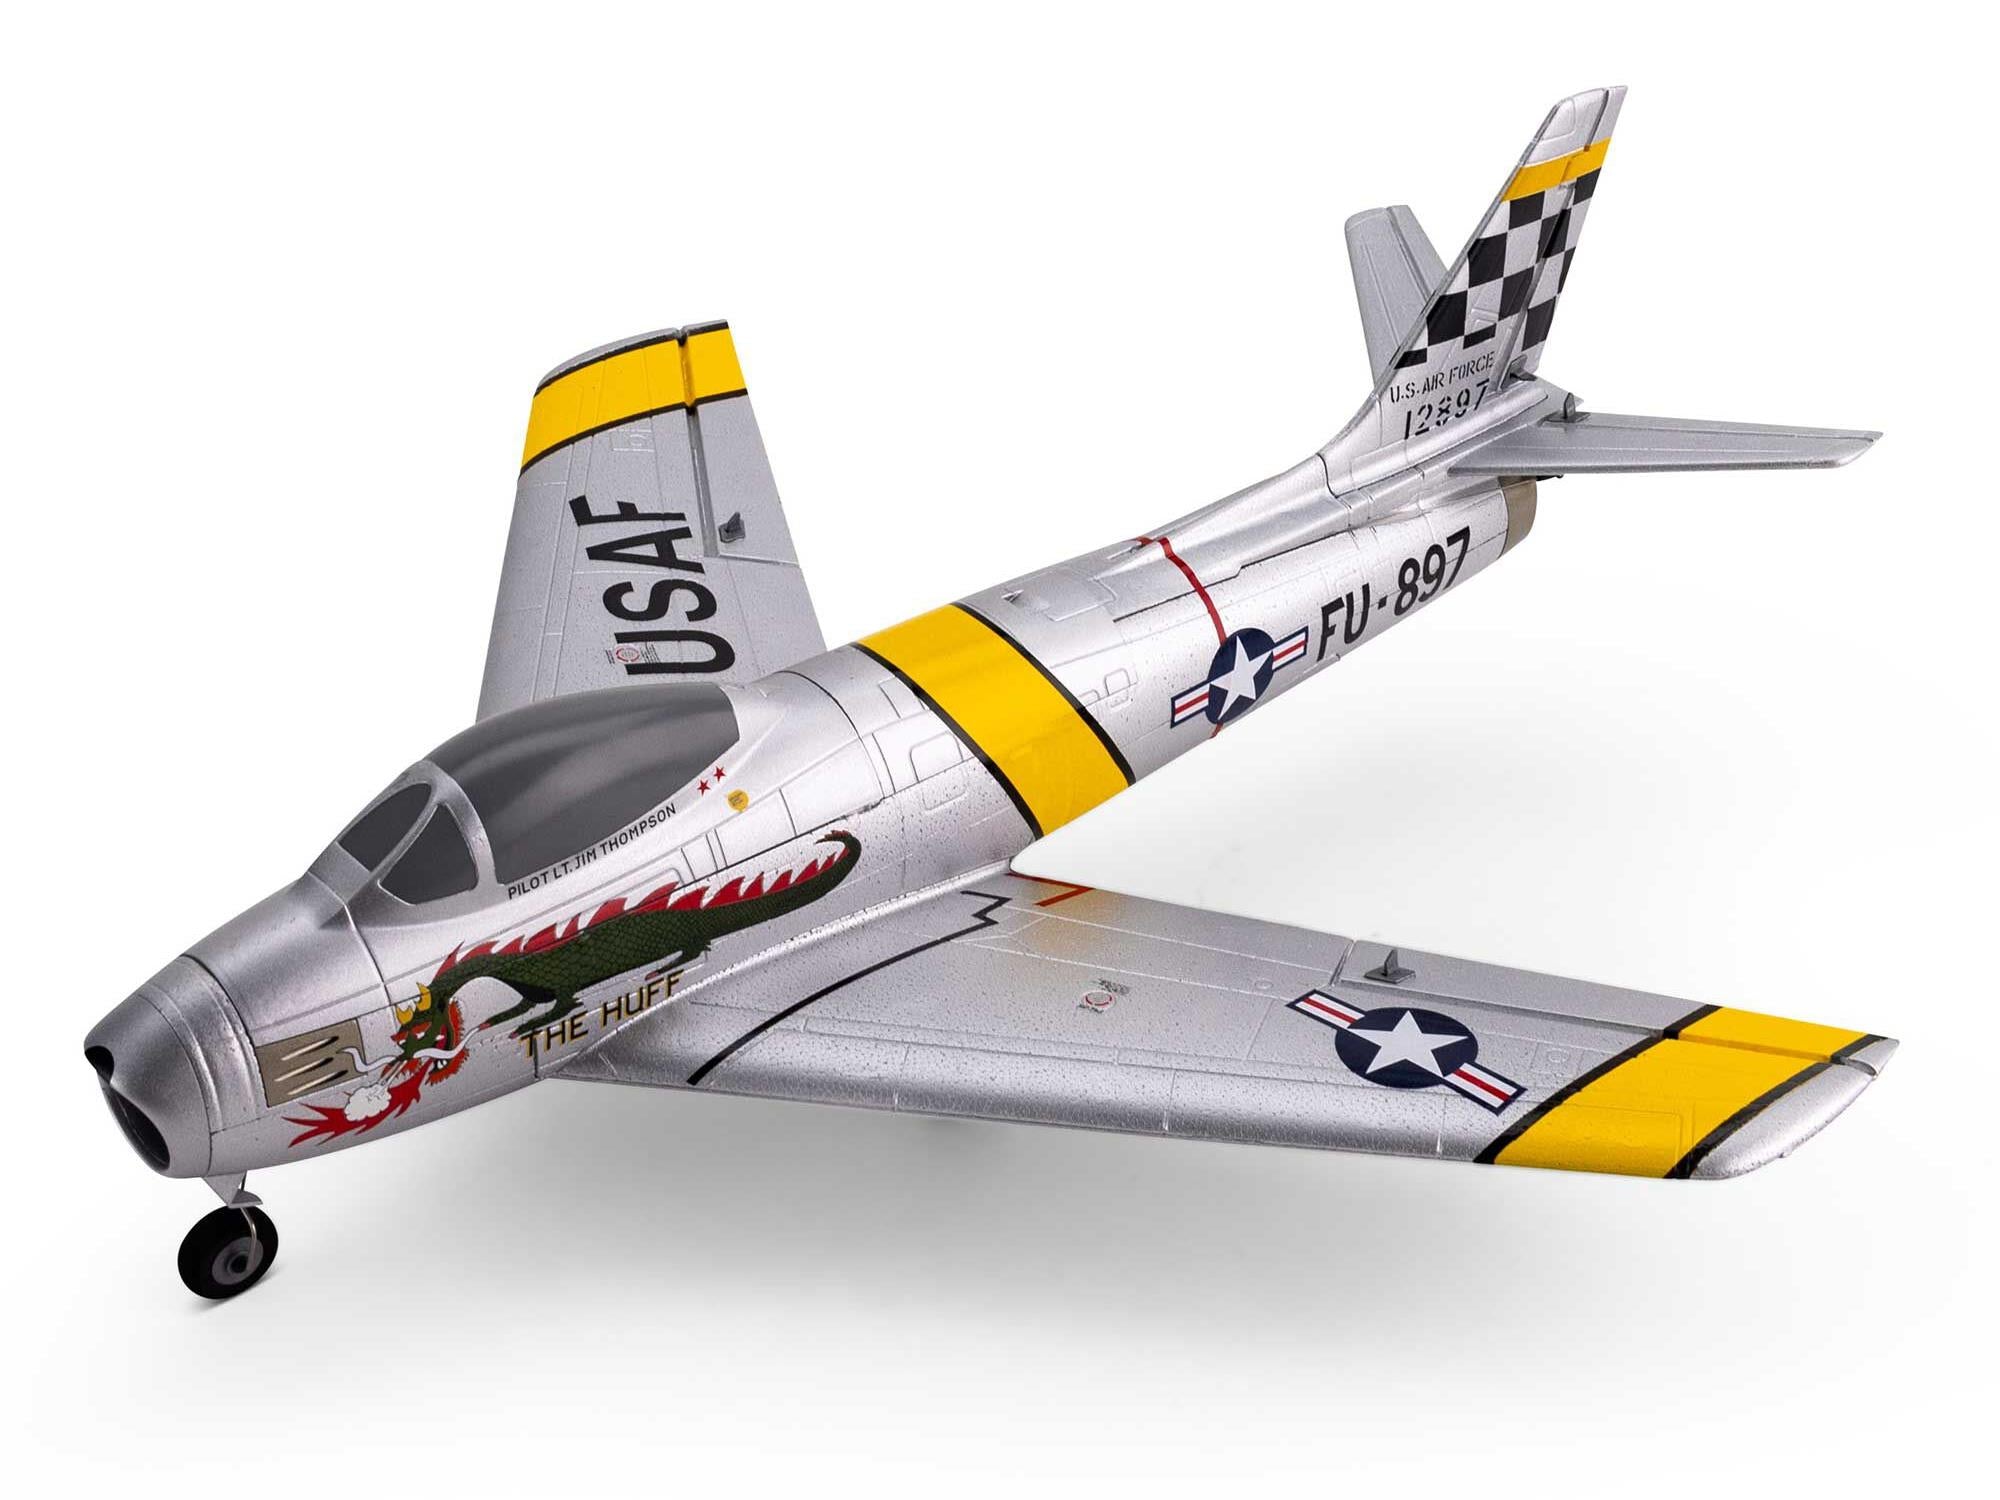 E-Flite UMX F-86 Sabre 30mm EDF Jet BNF Basic with AS3X and SAFE Select EFLU7050